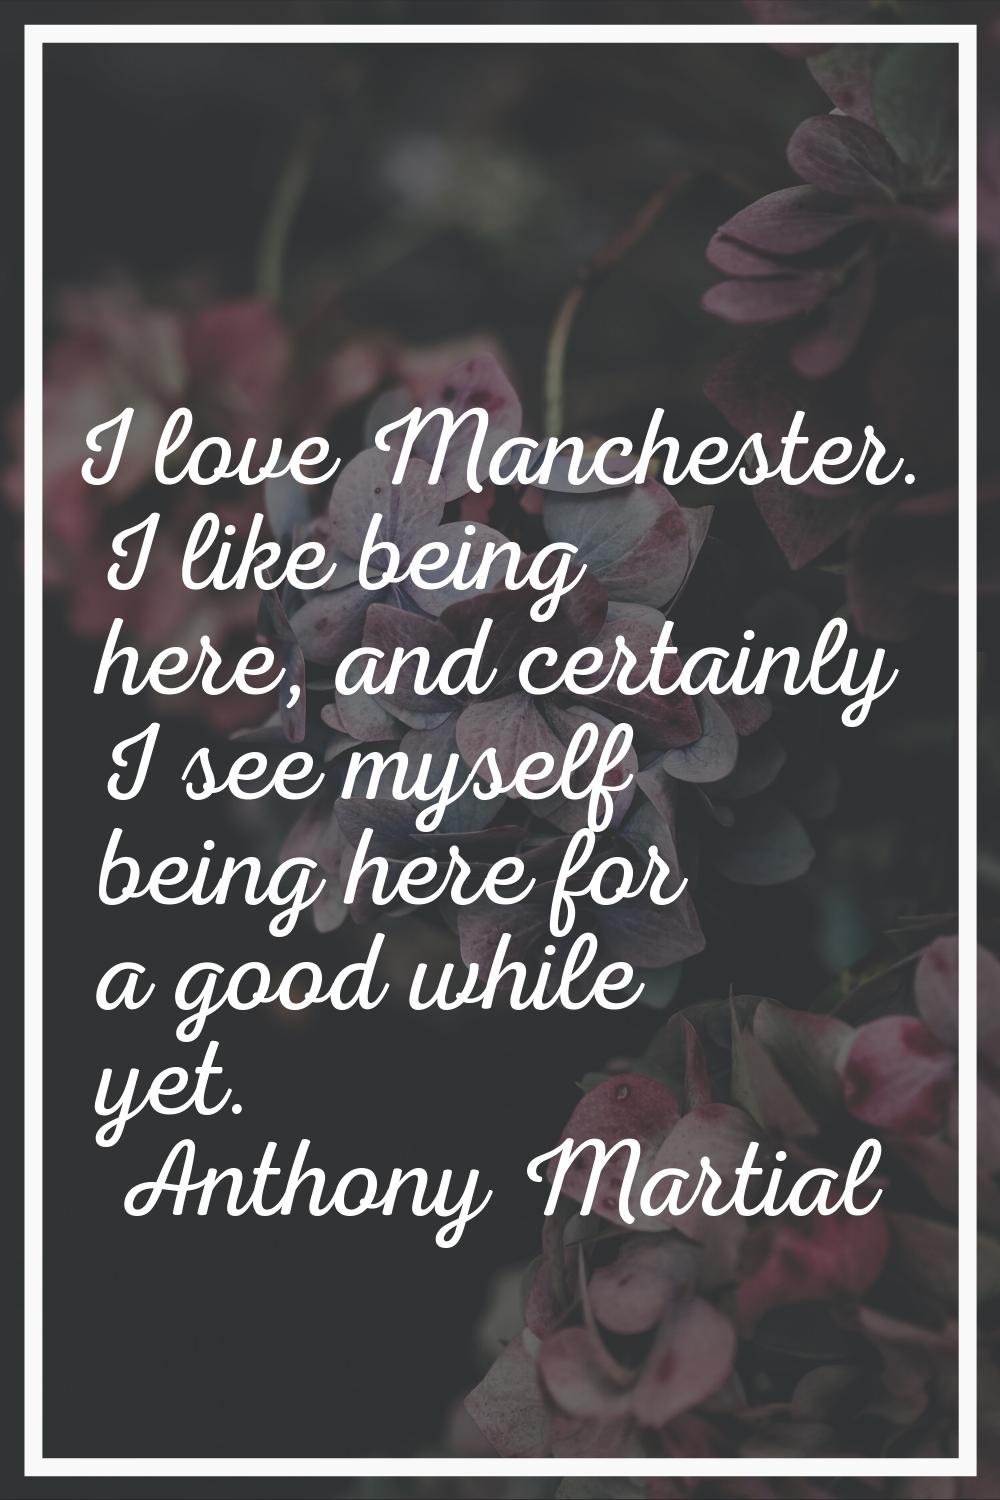 I love Manchester. I like being here, and certainly I see myself being here for a good while yet.